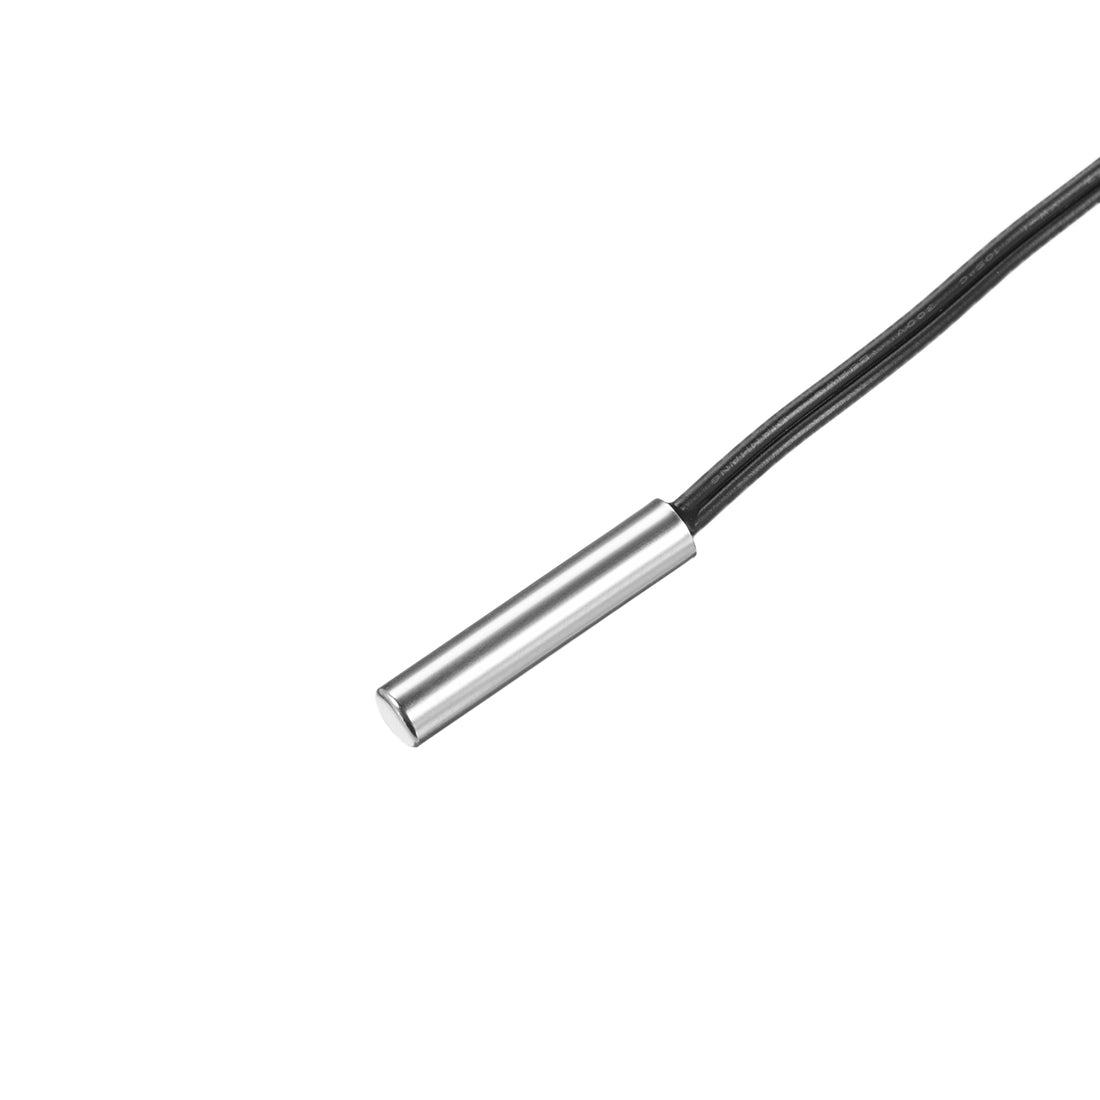 uxcell Uxcell 10K NTC Thermistor Probe 39.4 Inch Stainless Steel Sensitive Temperature Temp Sensor for Air Conditioner